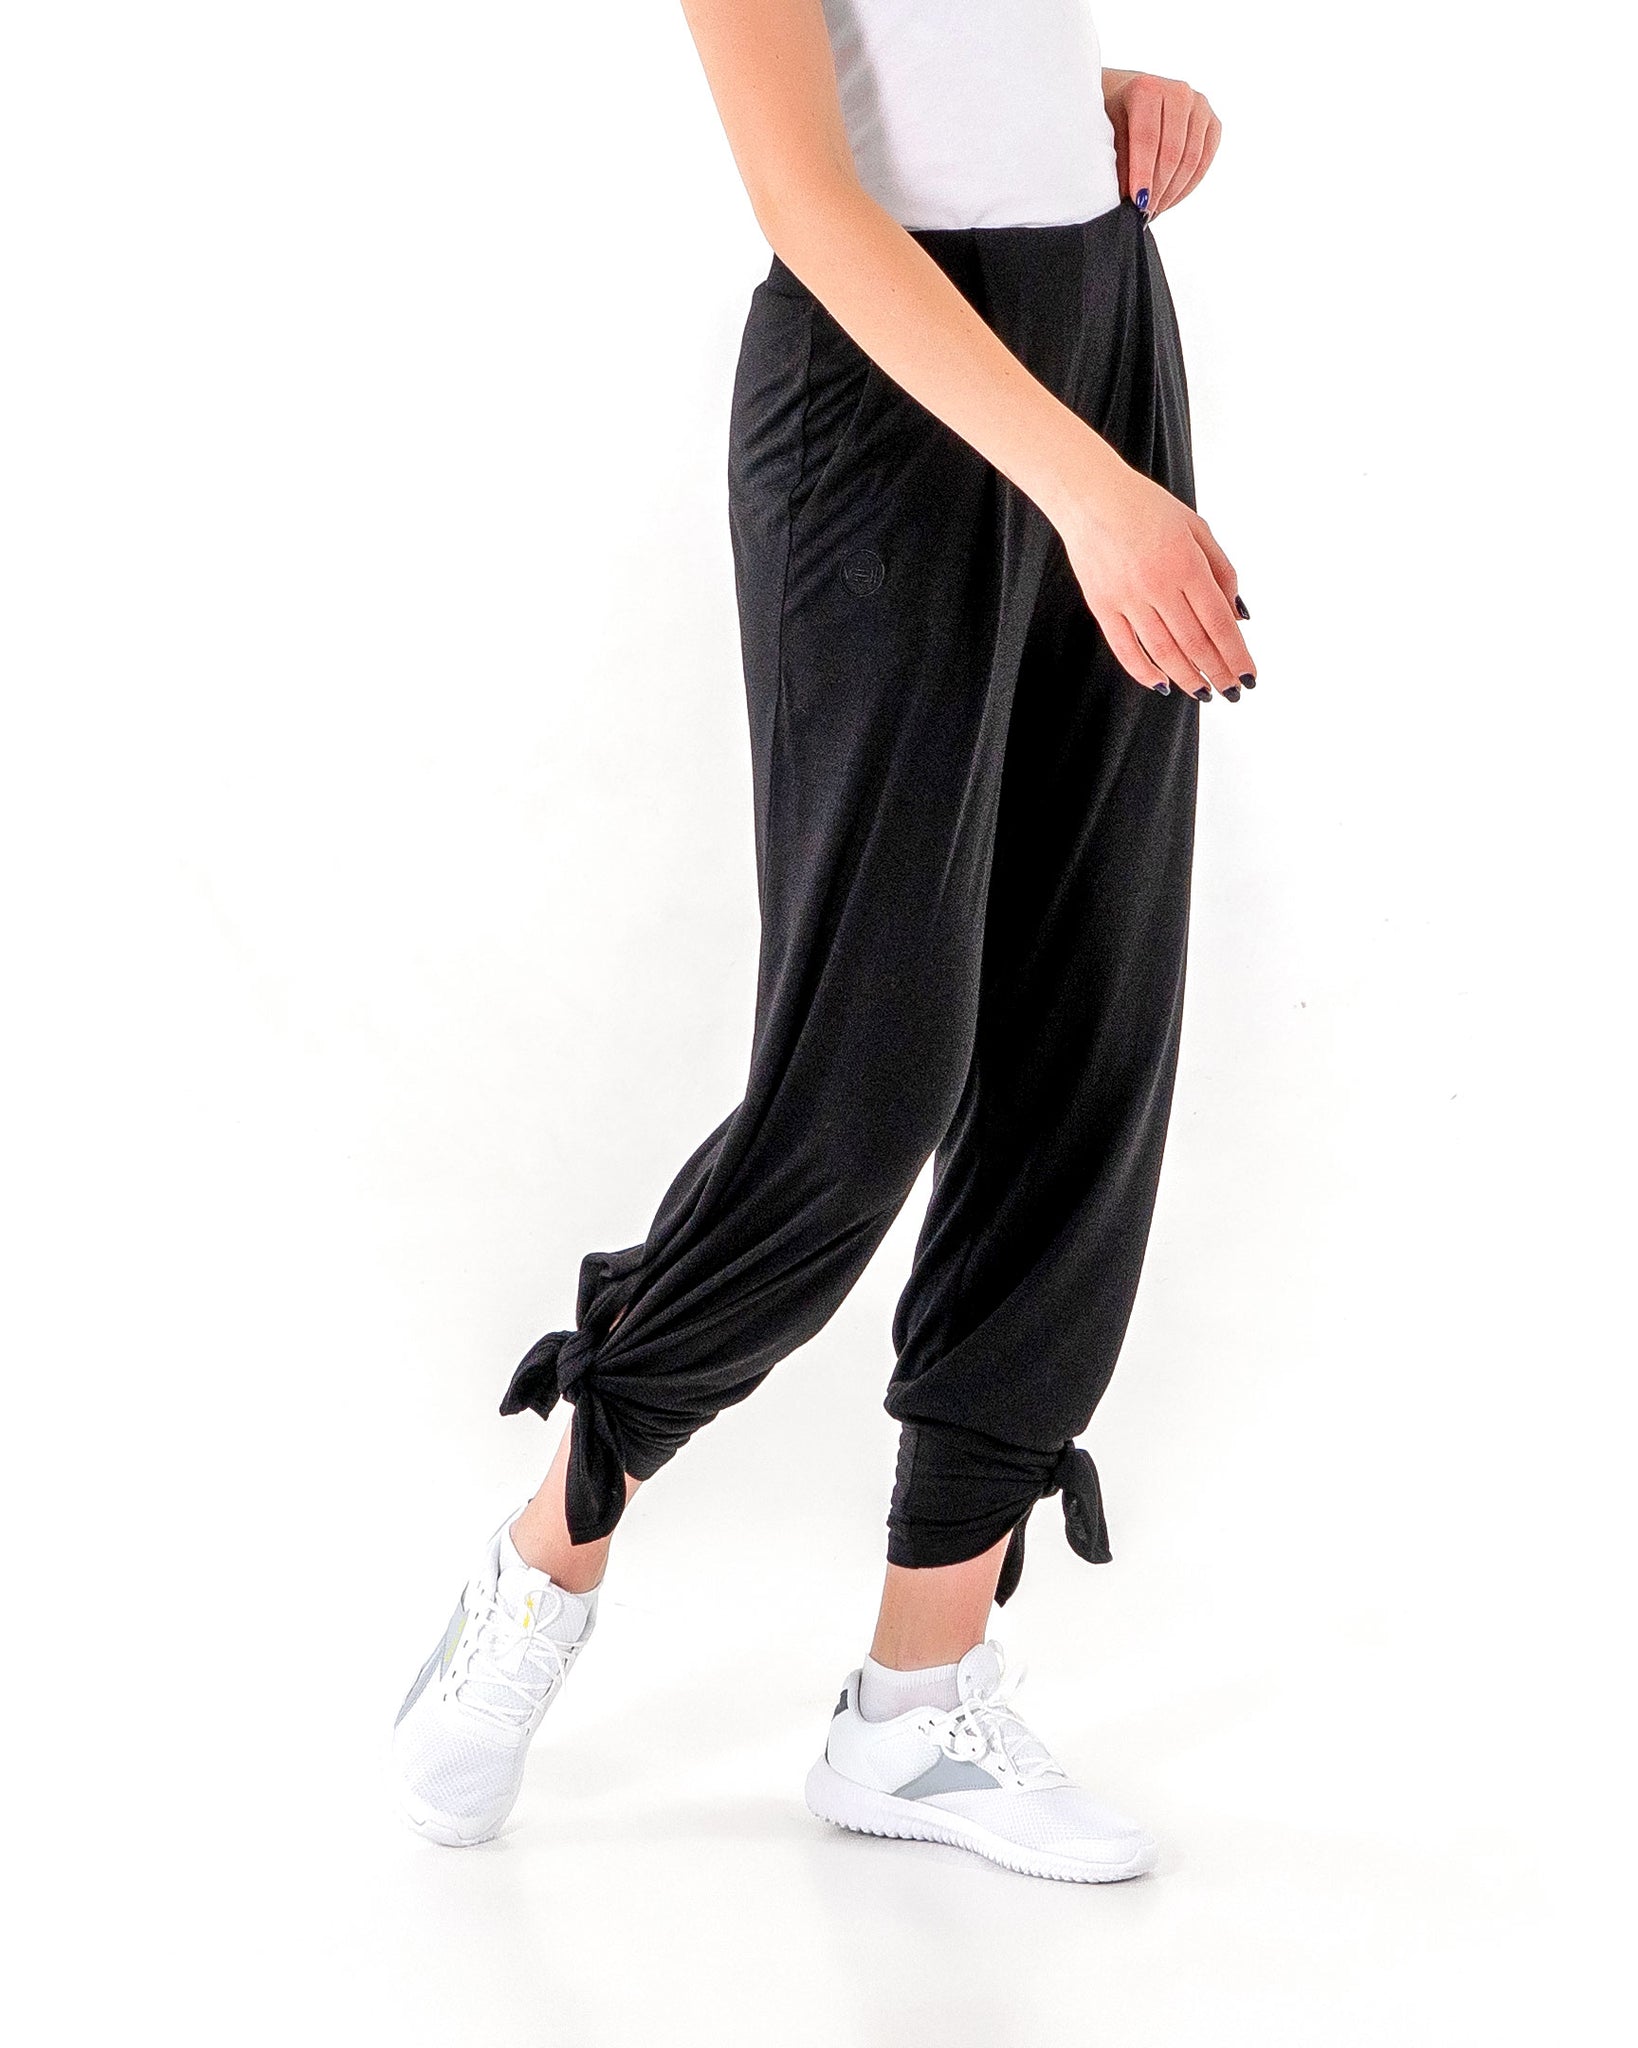 Swift Wide-Leg Sweatpant in black by Veil Garments. Modest activewear collection.